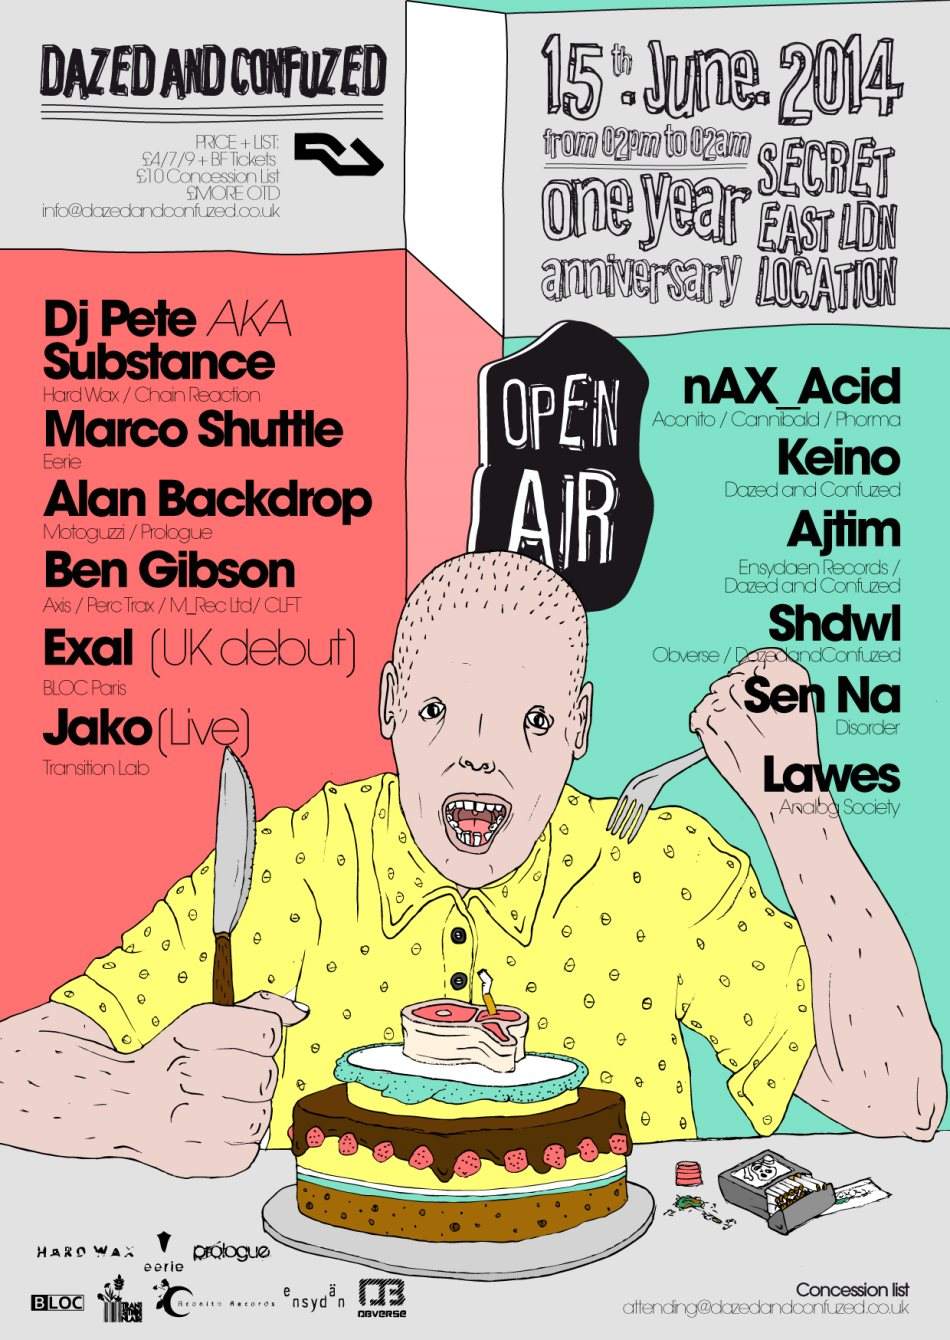 Dazed and Confuzed 1st Anniversary Open Air: DJ Pete, Marco Shuttle, Alan Backdrop - フライヤー表